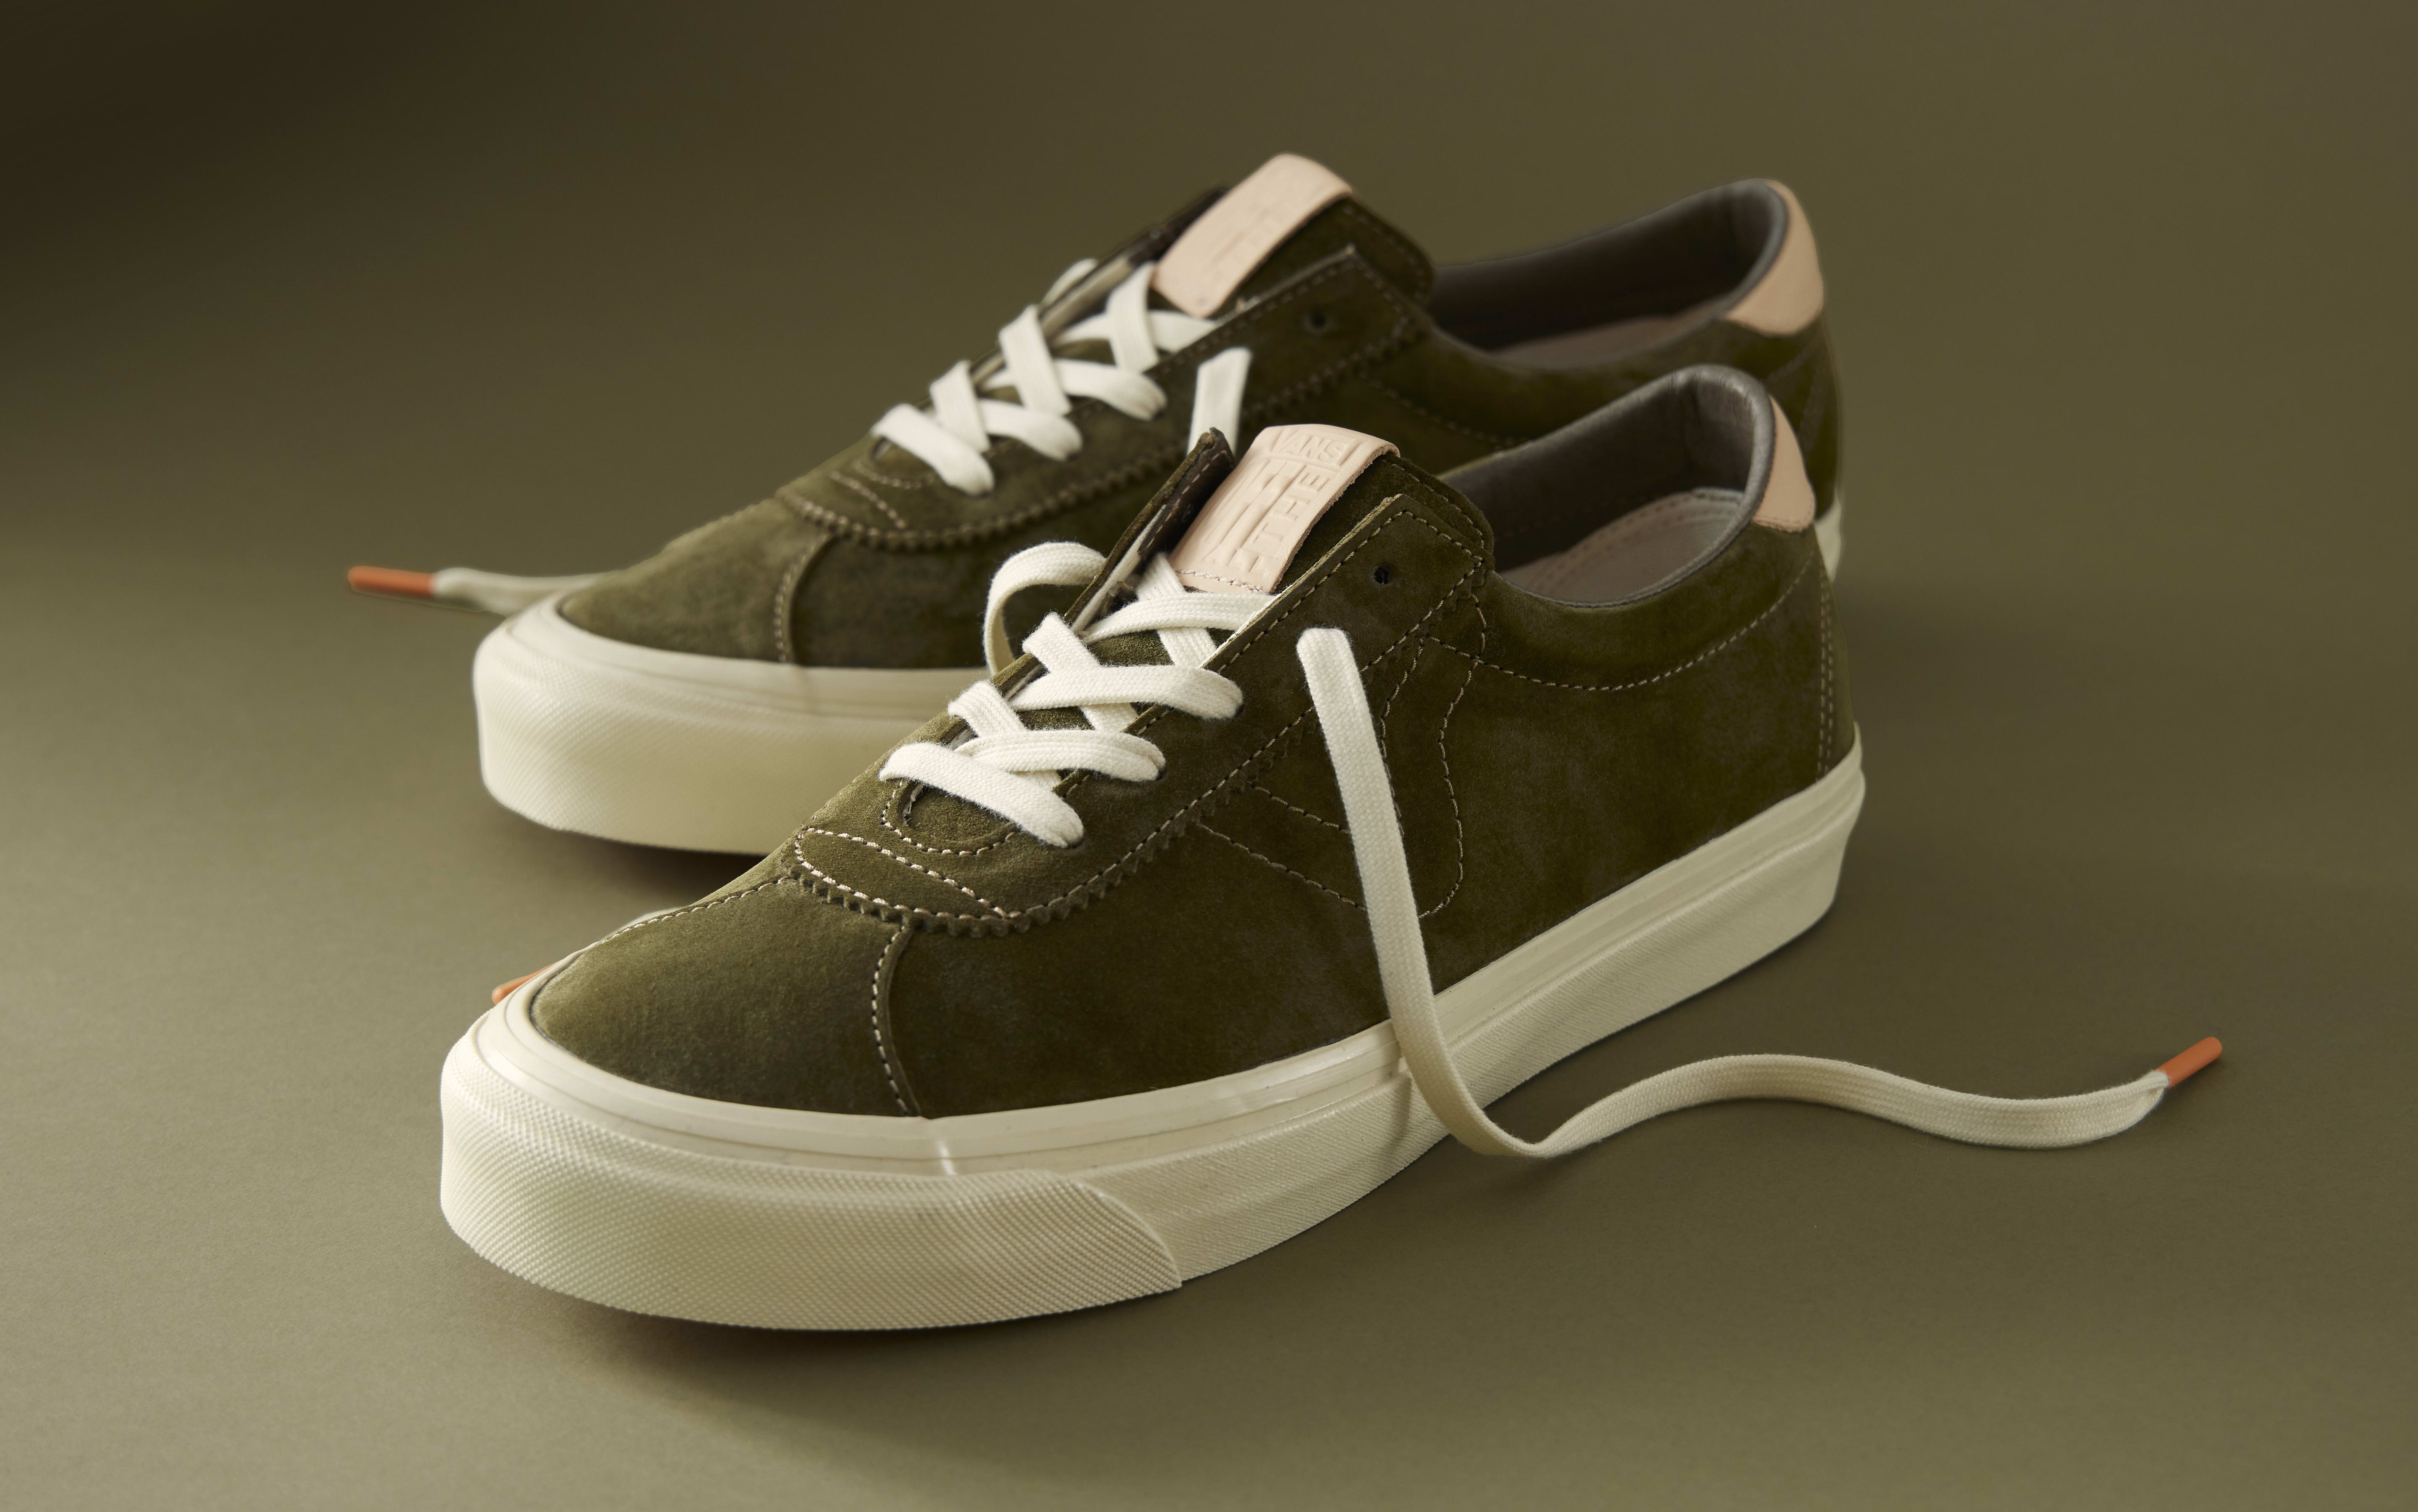 Todd Snyder x Vans 'Dirty Martini' Collection